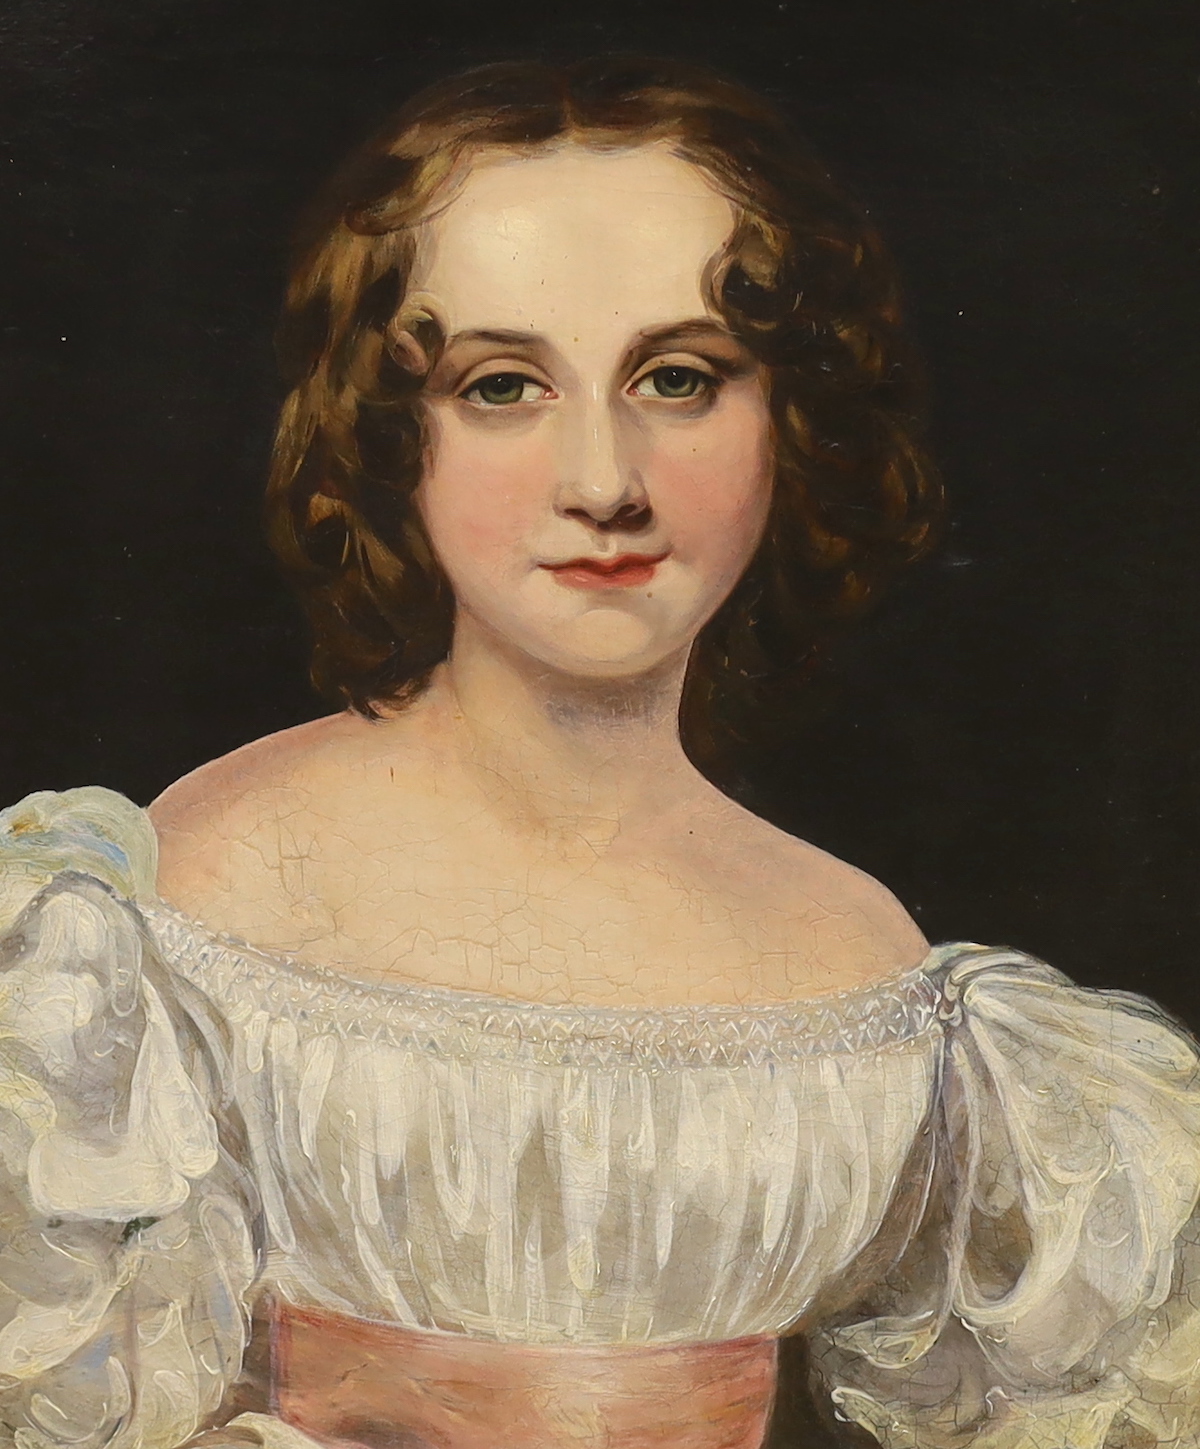 20th century English School, oil on canvas, Portrait of a young girl wearing Victorian dress, 50 x 42cm